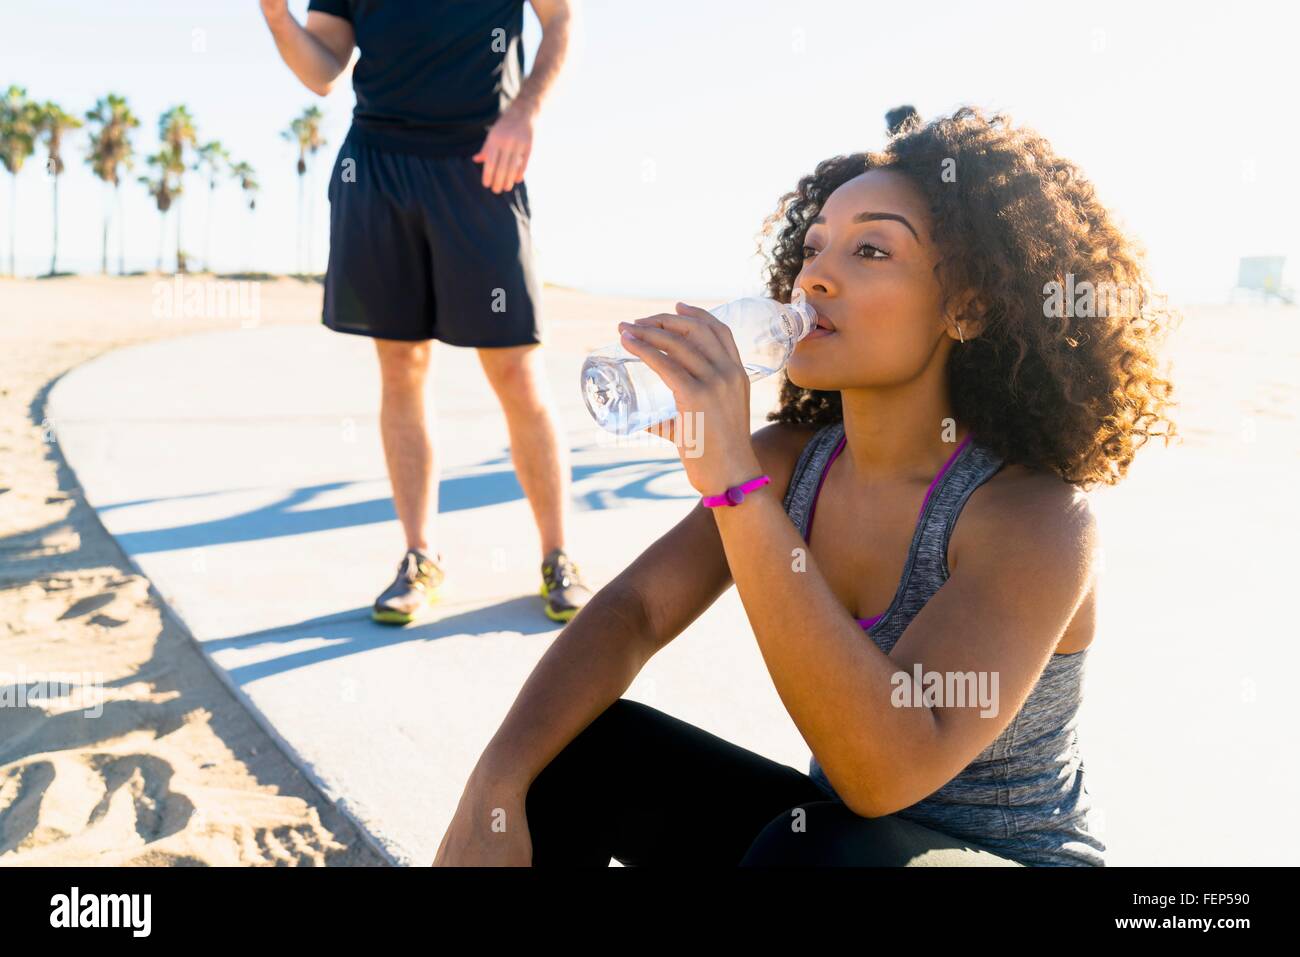 Mid adult woman, by beach, drinking from water bottle Stock Photo